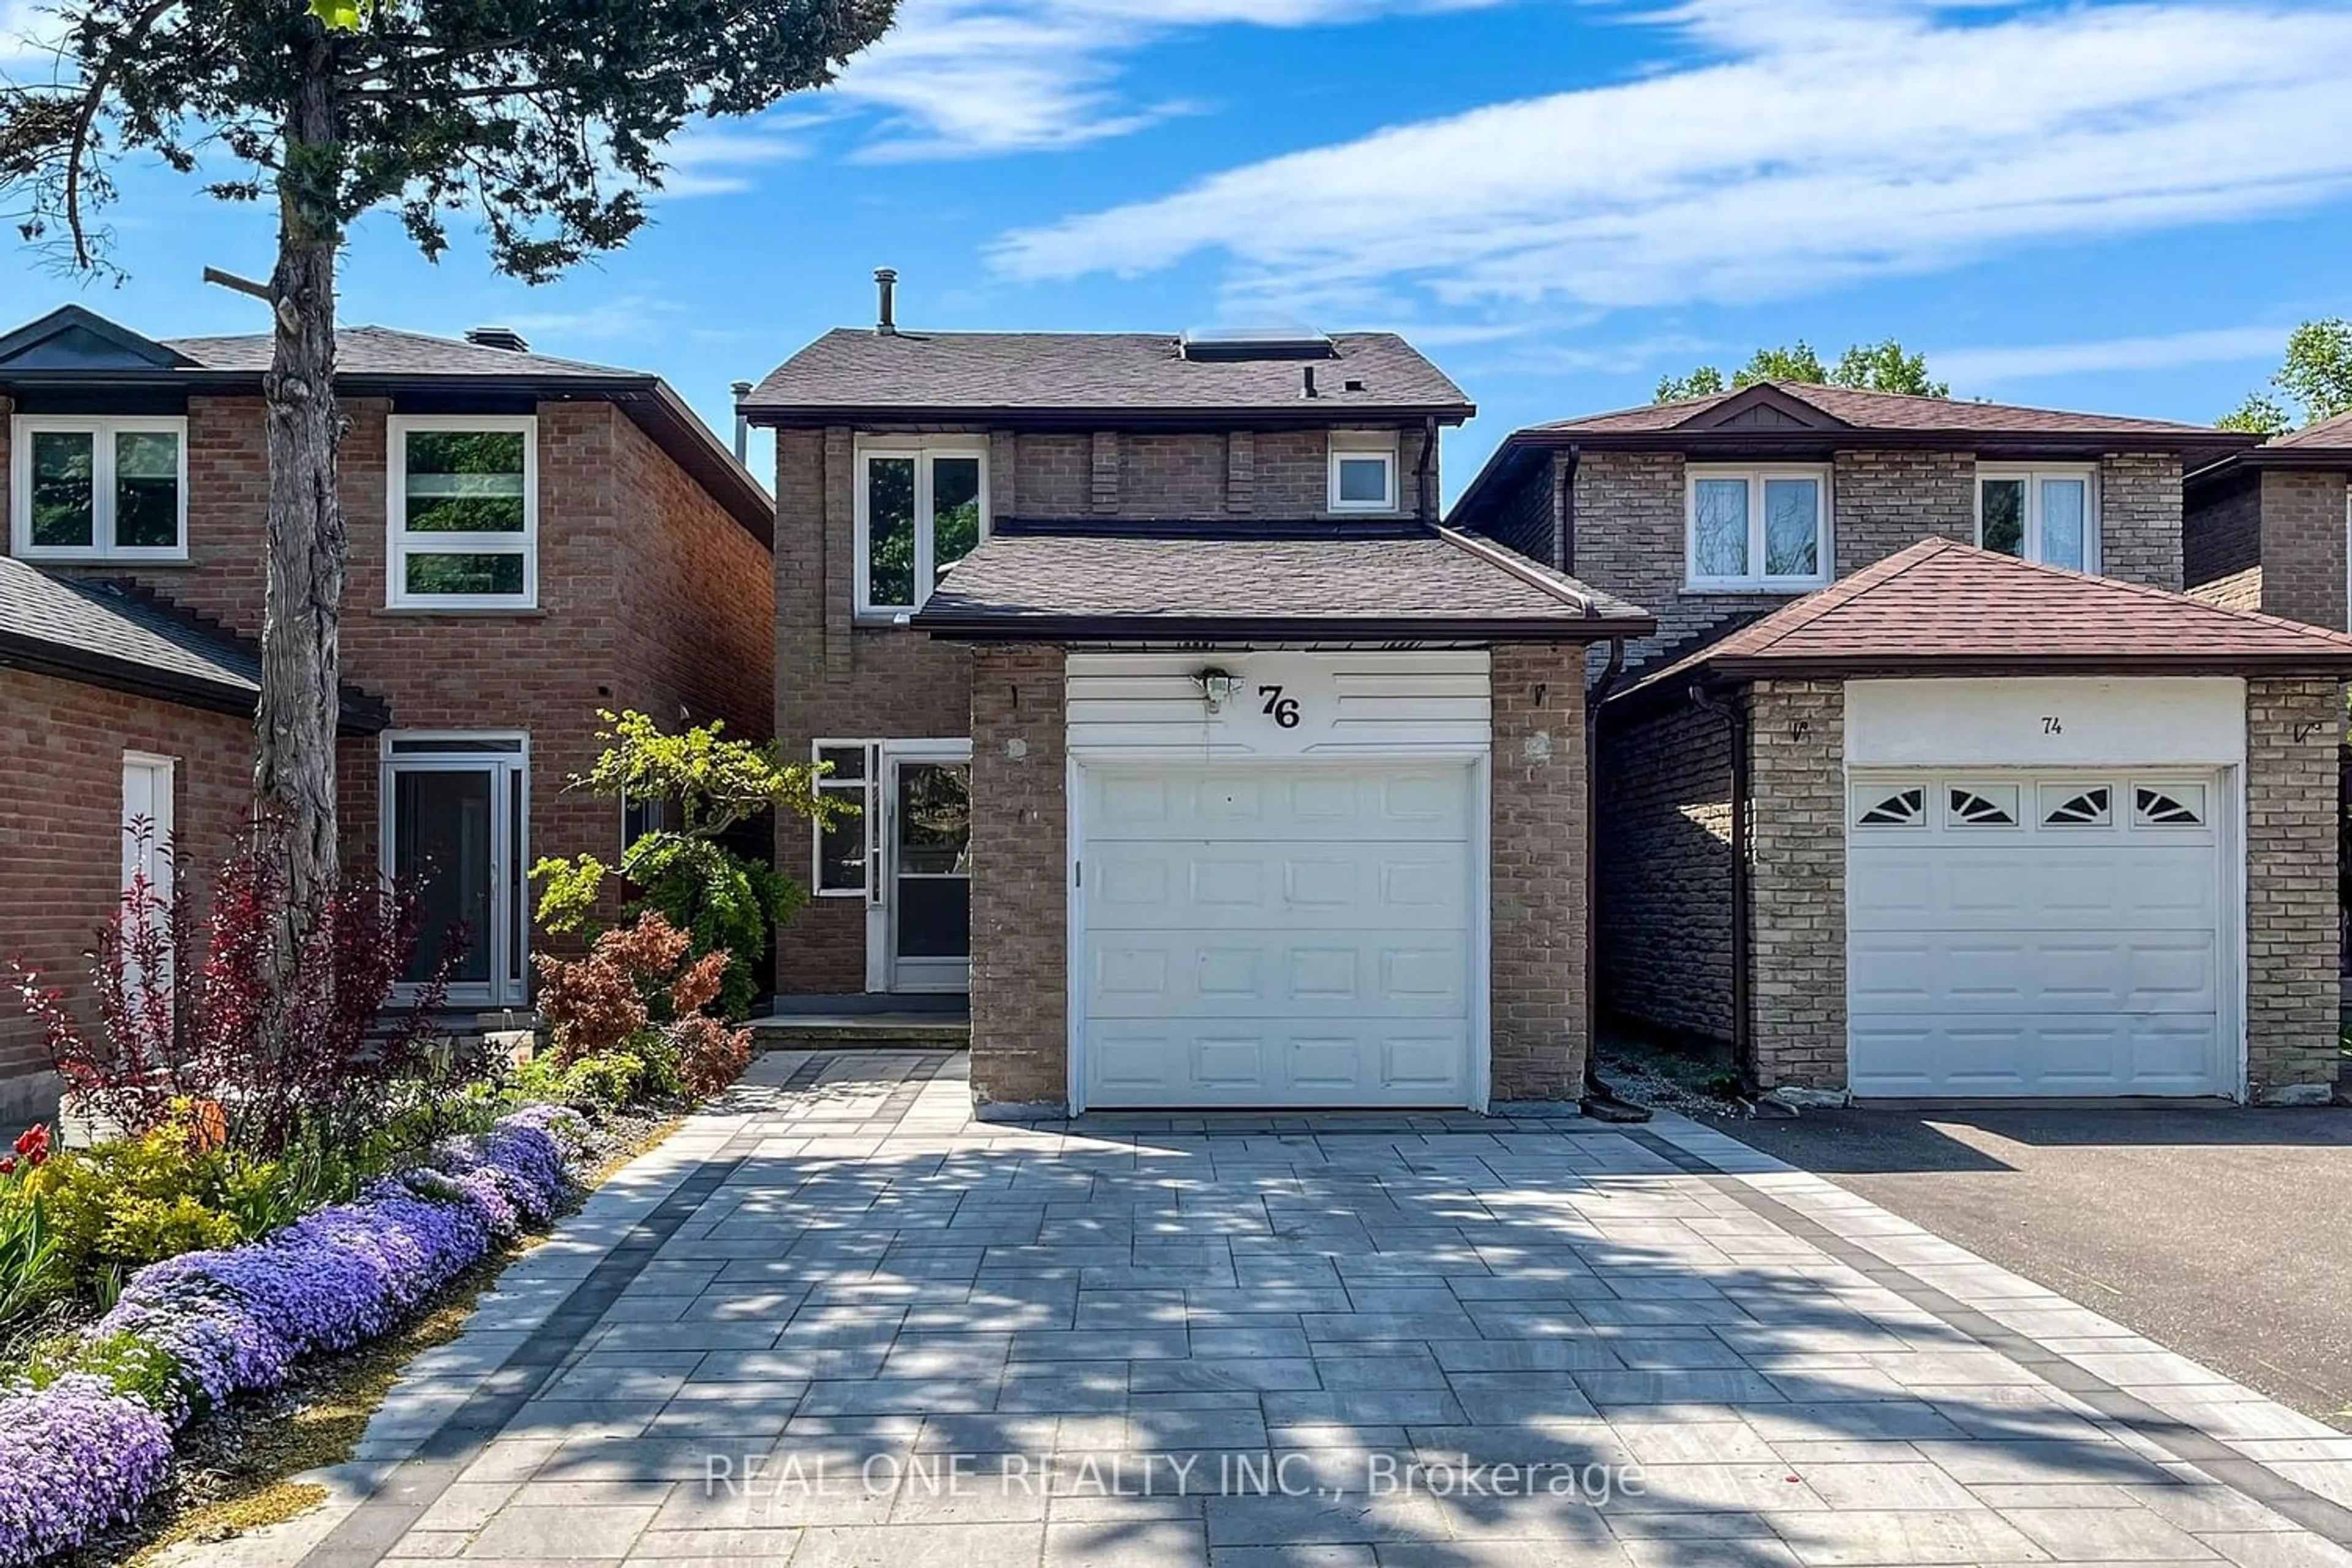 Home with brick exterior material for 76 Cottsmore Cres, Markham Ontario L3R 3X6